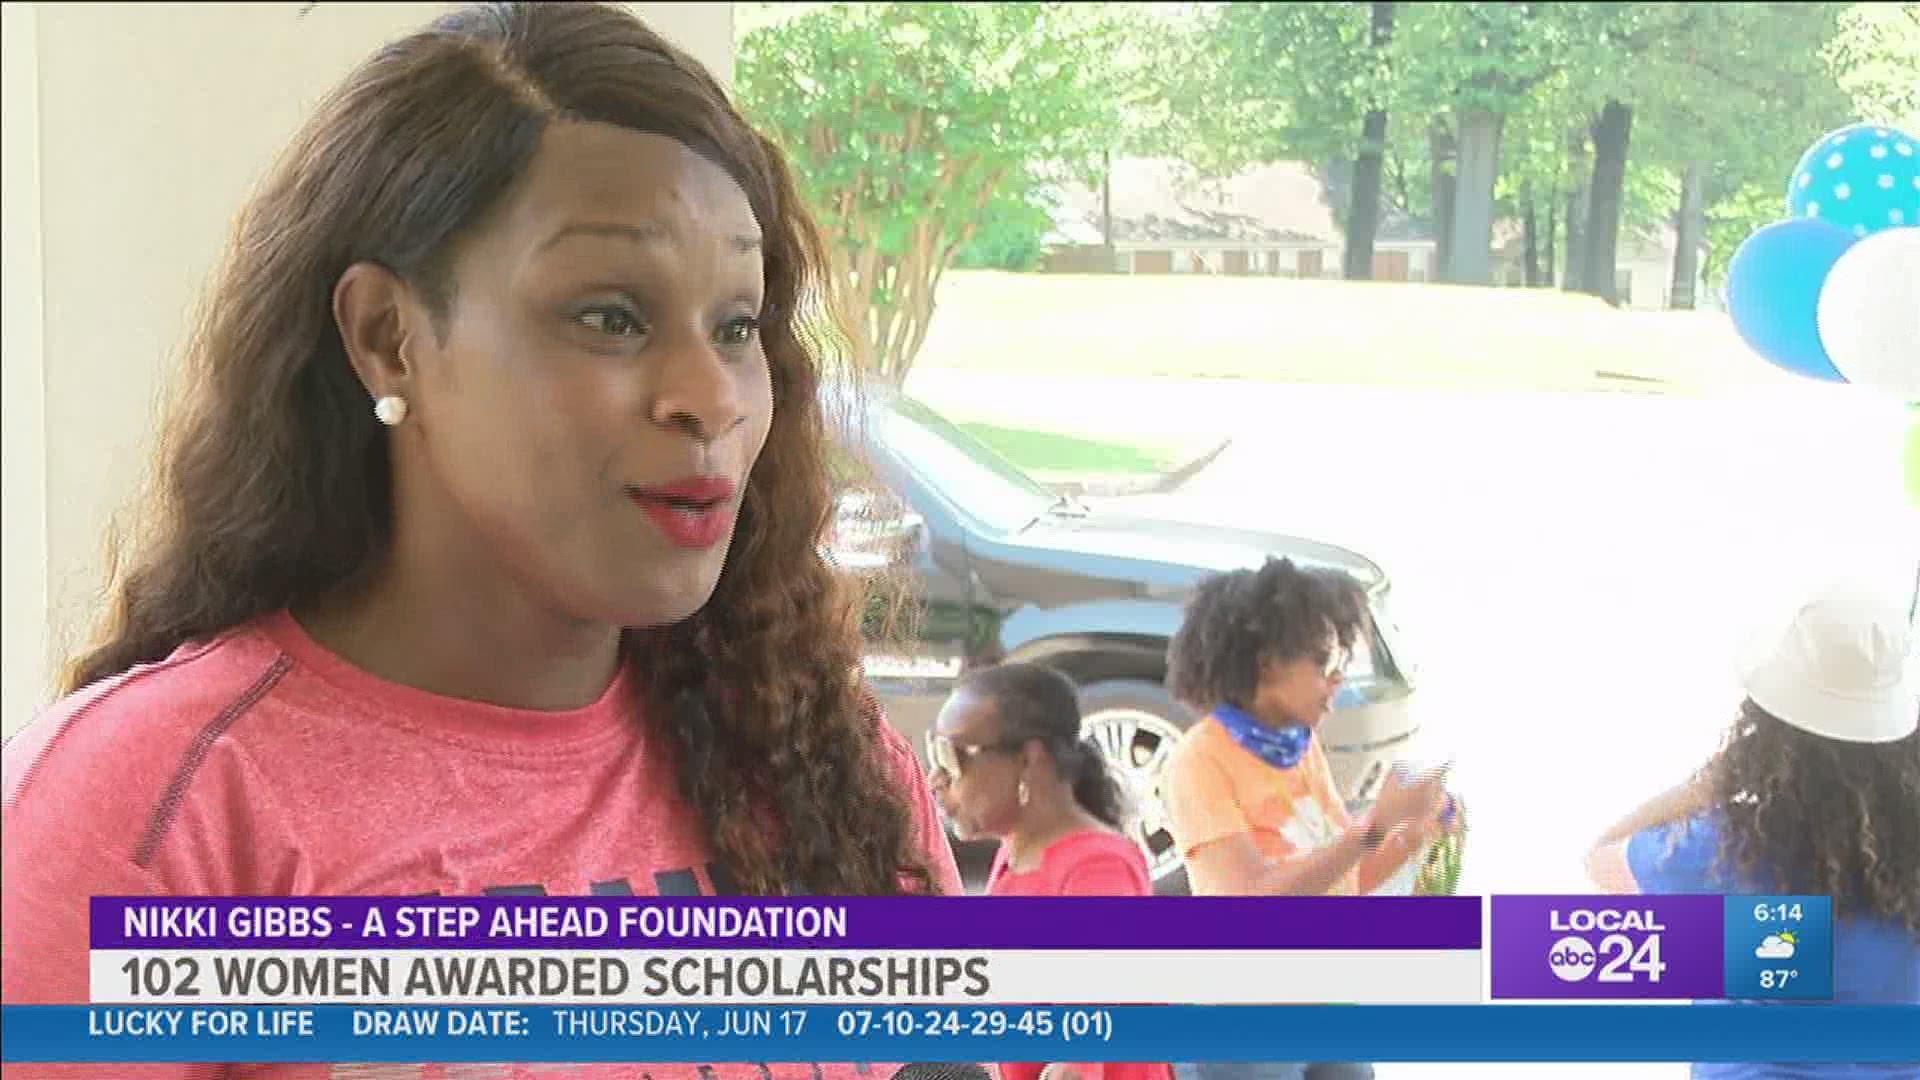 A Step Ahead Foundation and Girls Inc partnered to provide the scholarships.